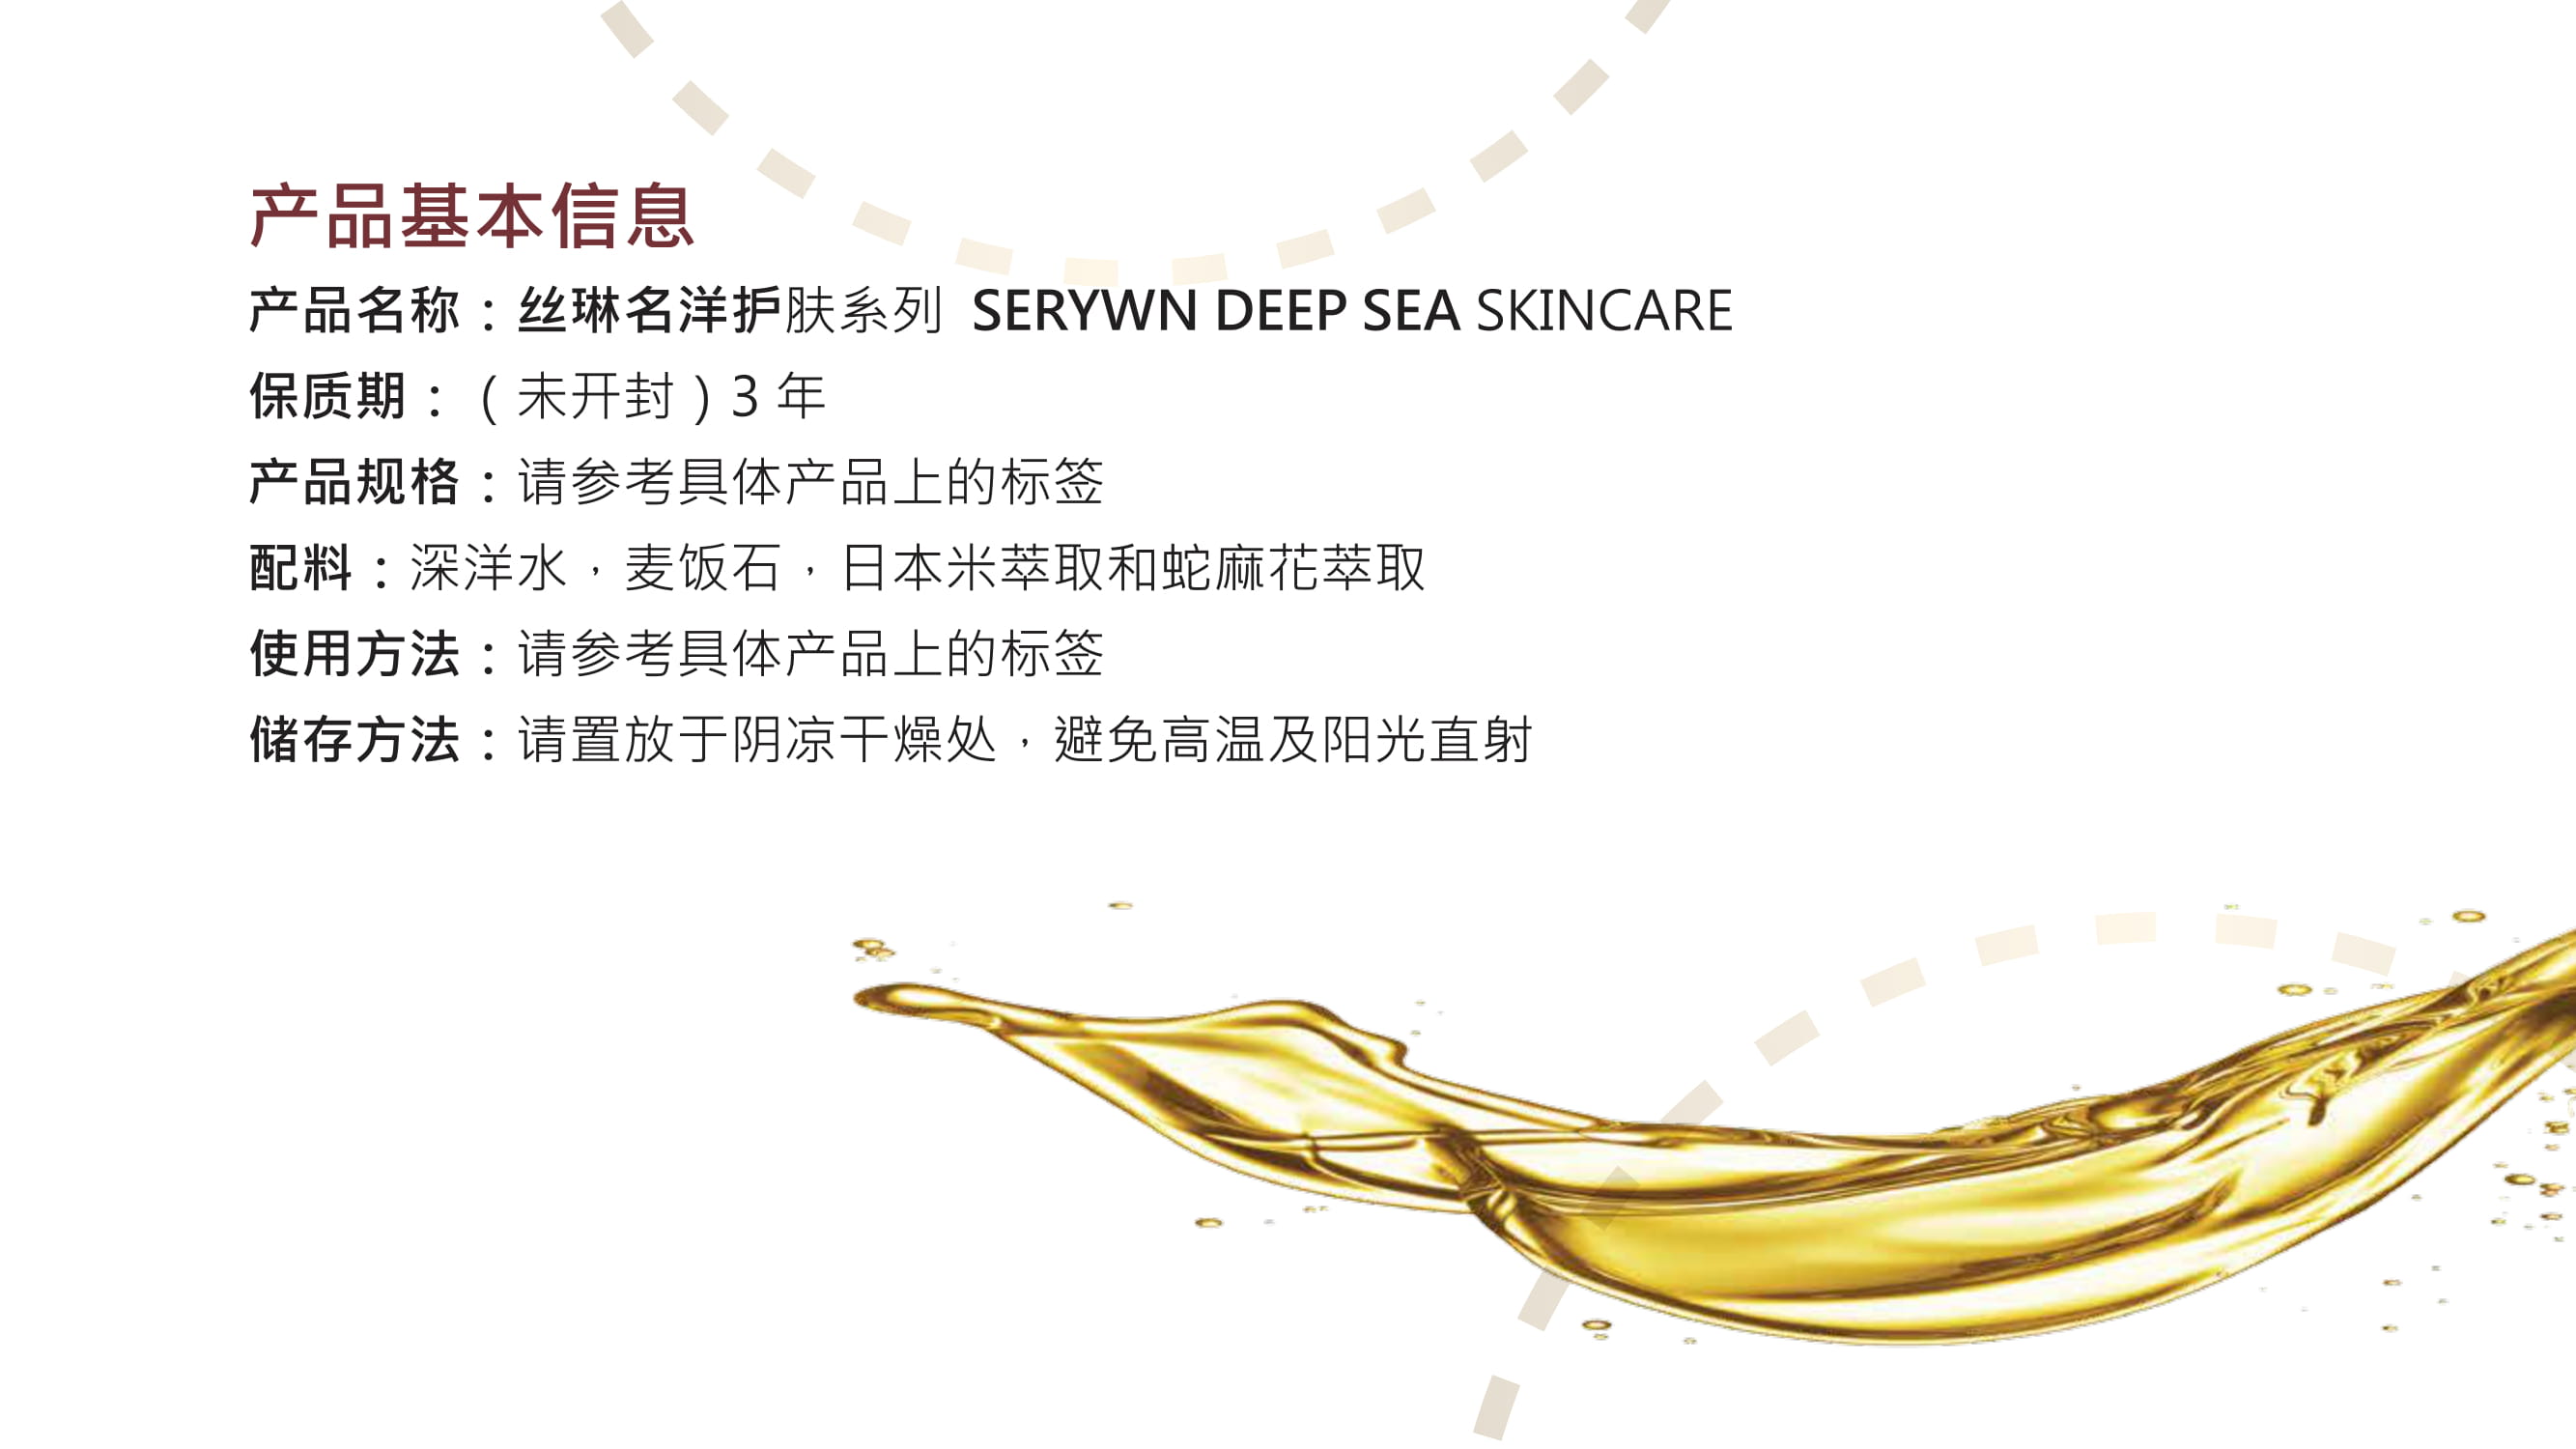 skincare product details